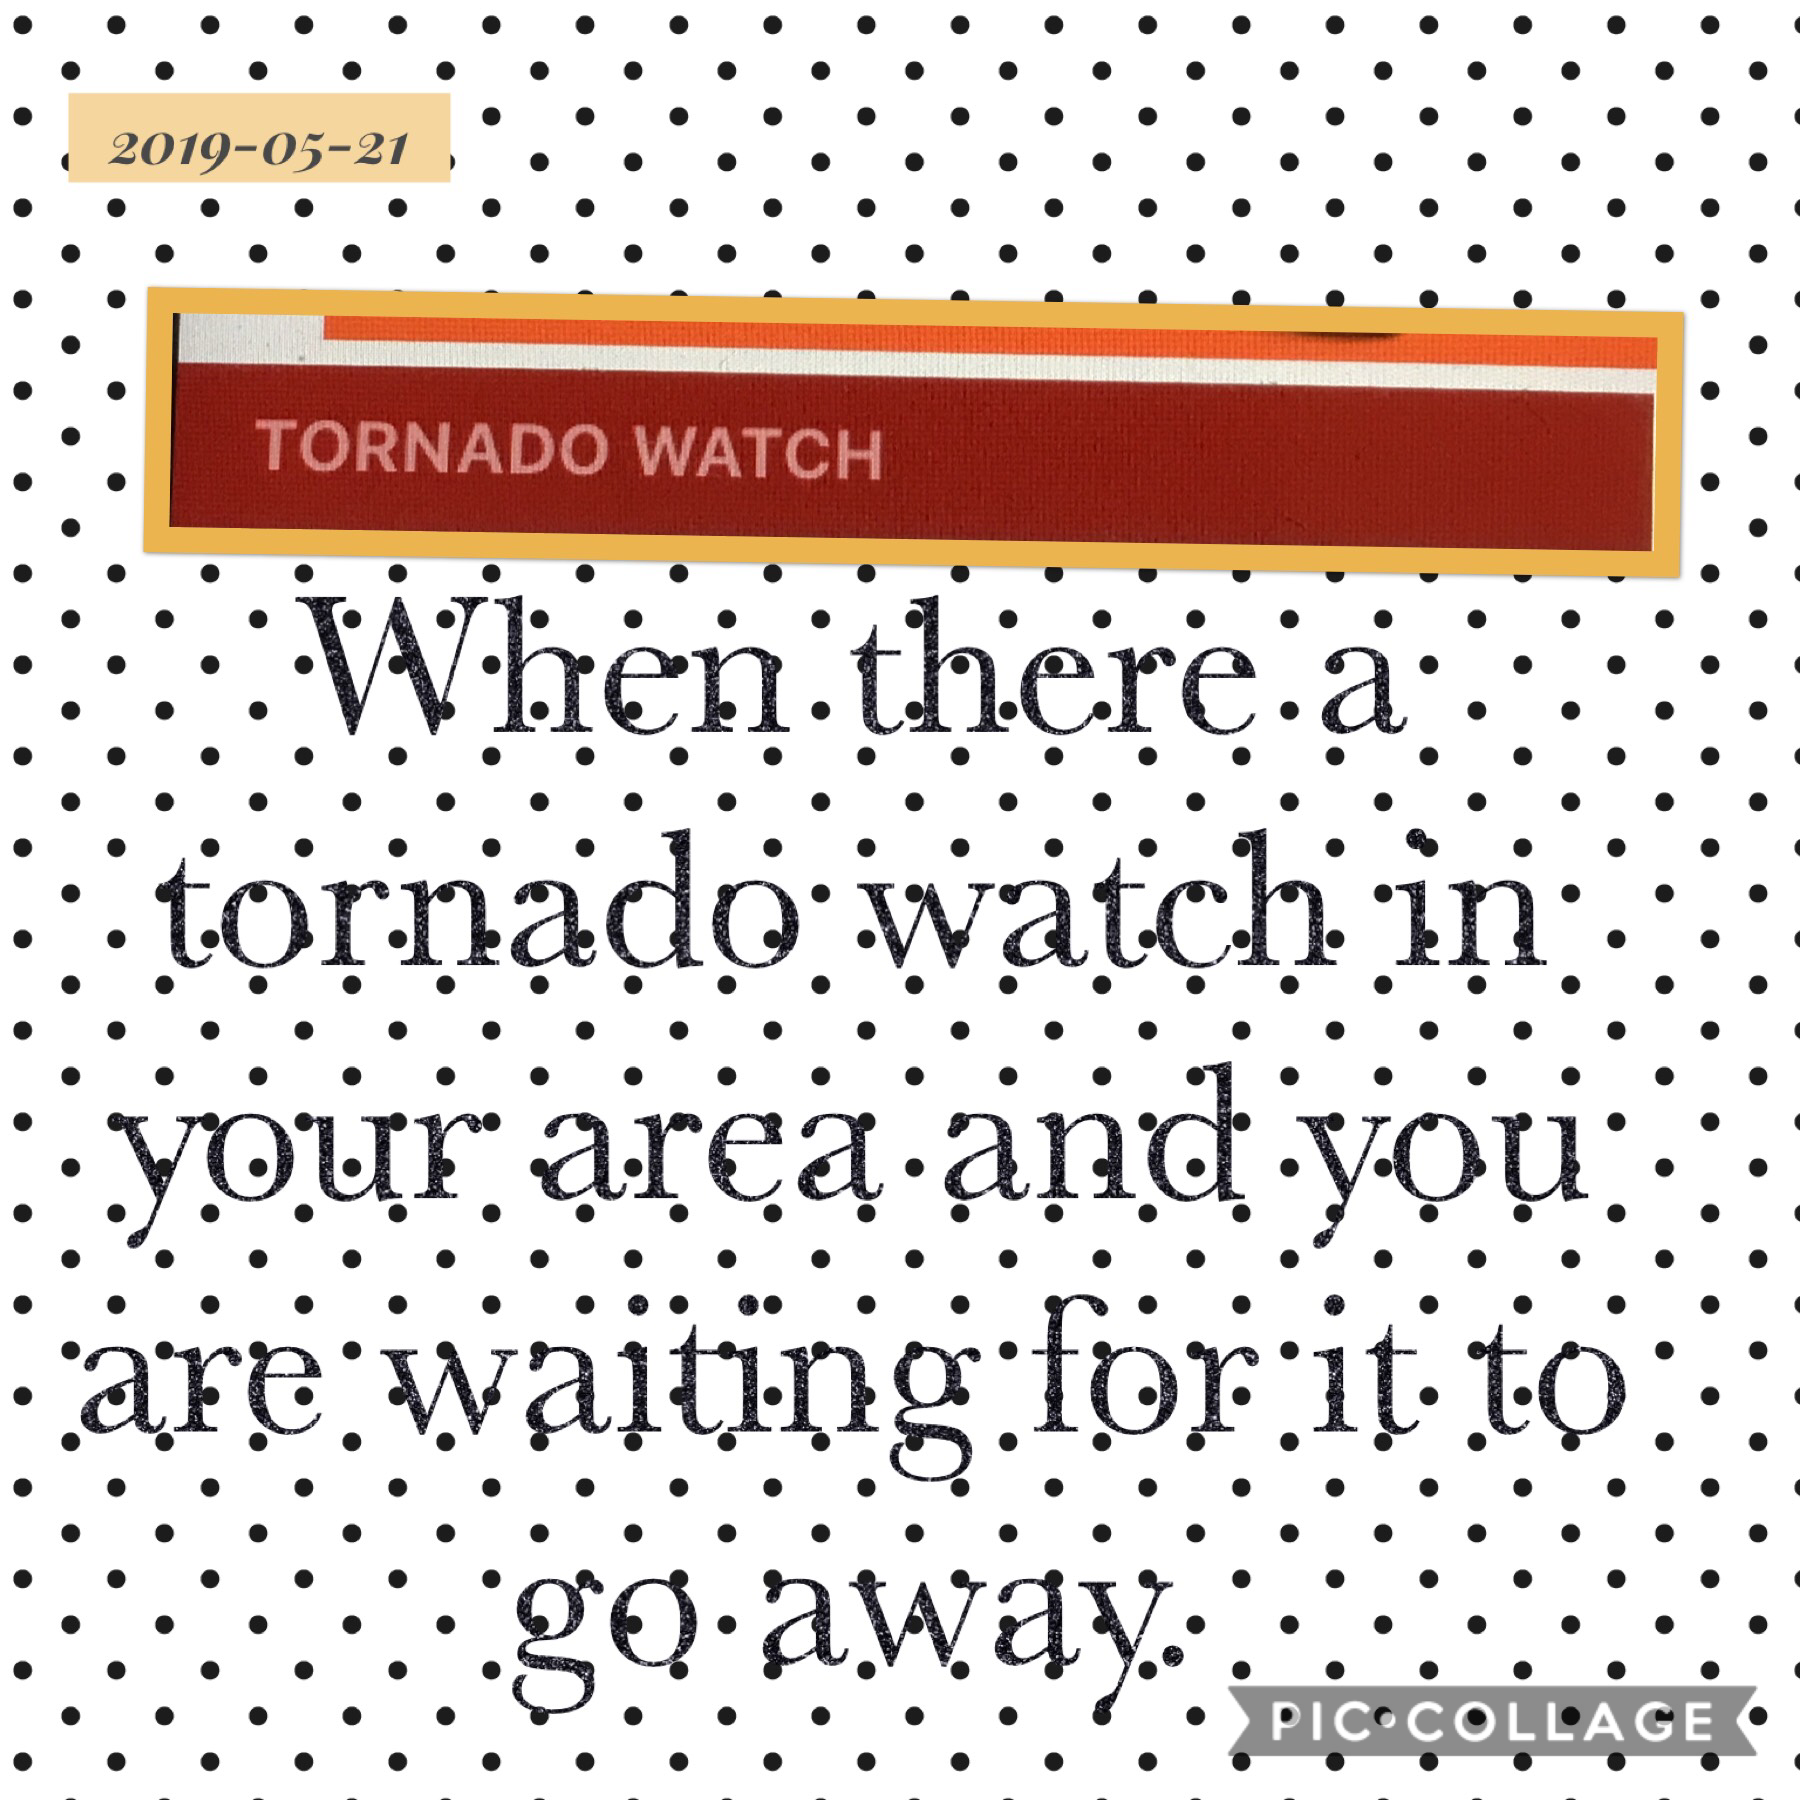 I live in Illinois so when there is a tornado watch or warning it kind of means to take shelter. Fun fact: did you know that Illinois is in tornado alley.